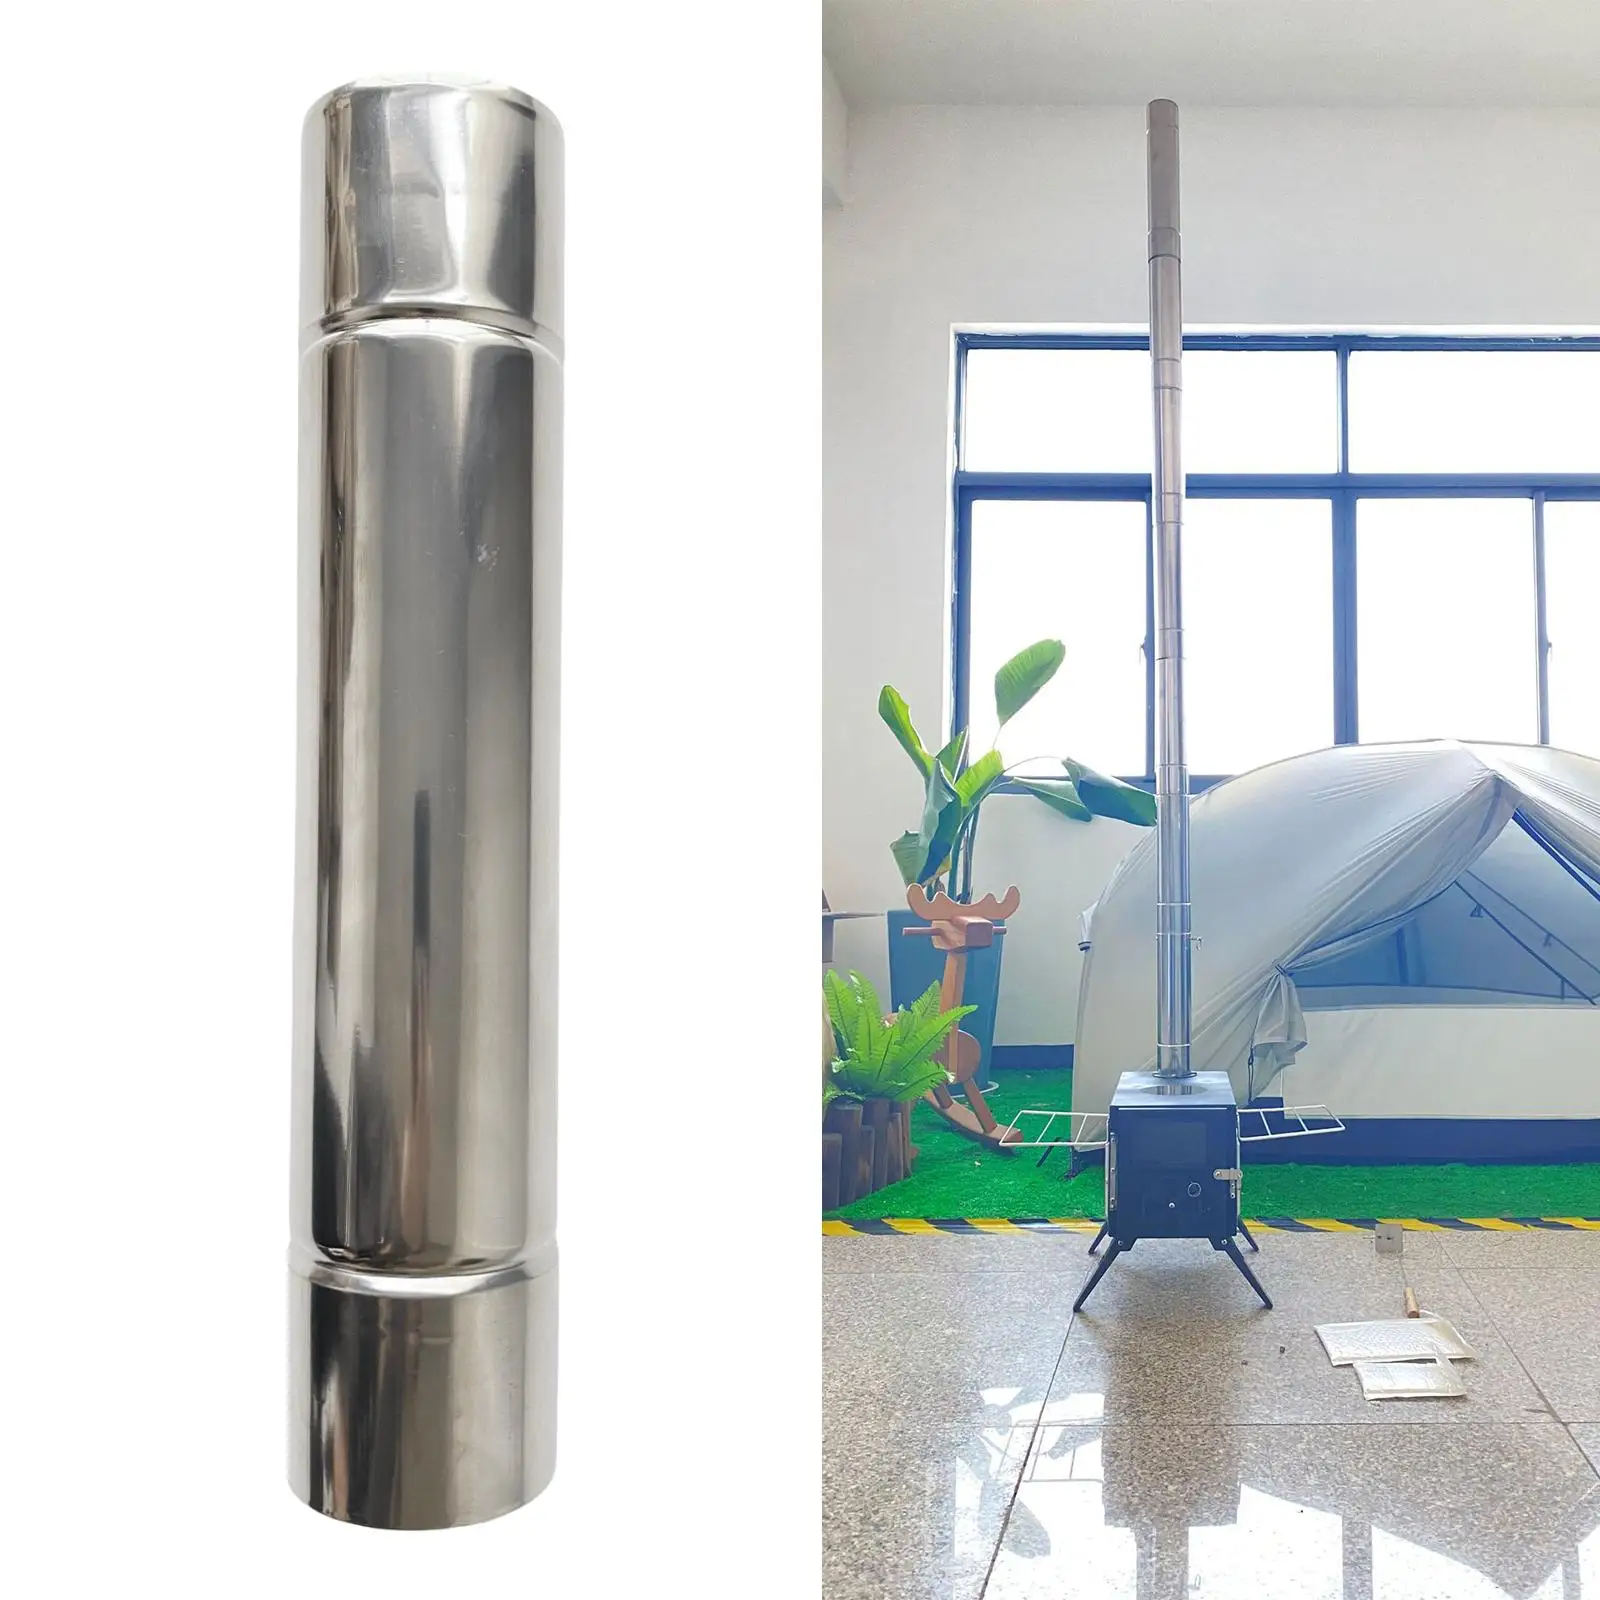 Straight Stove Pipe Flue Chimney Extension Tube Hot Tent Wood Stove Stainless Steel for Winter Heater Wood Log Burning Stove